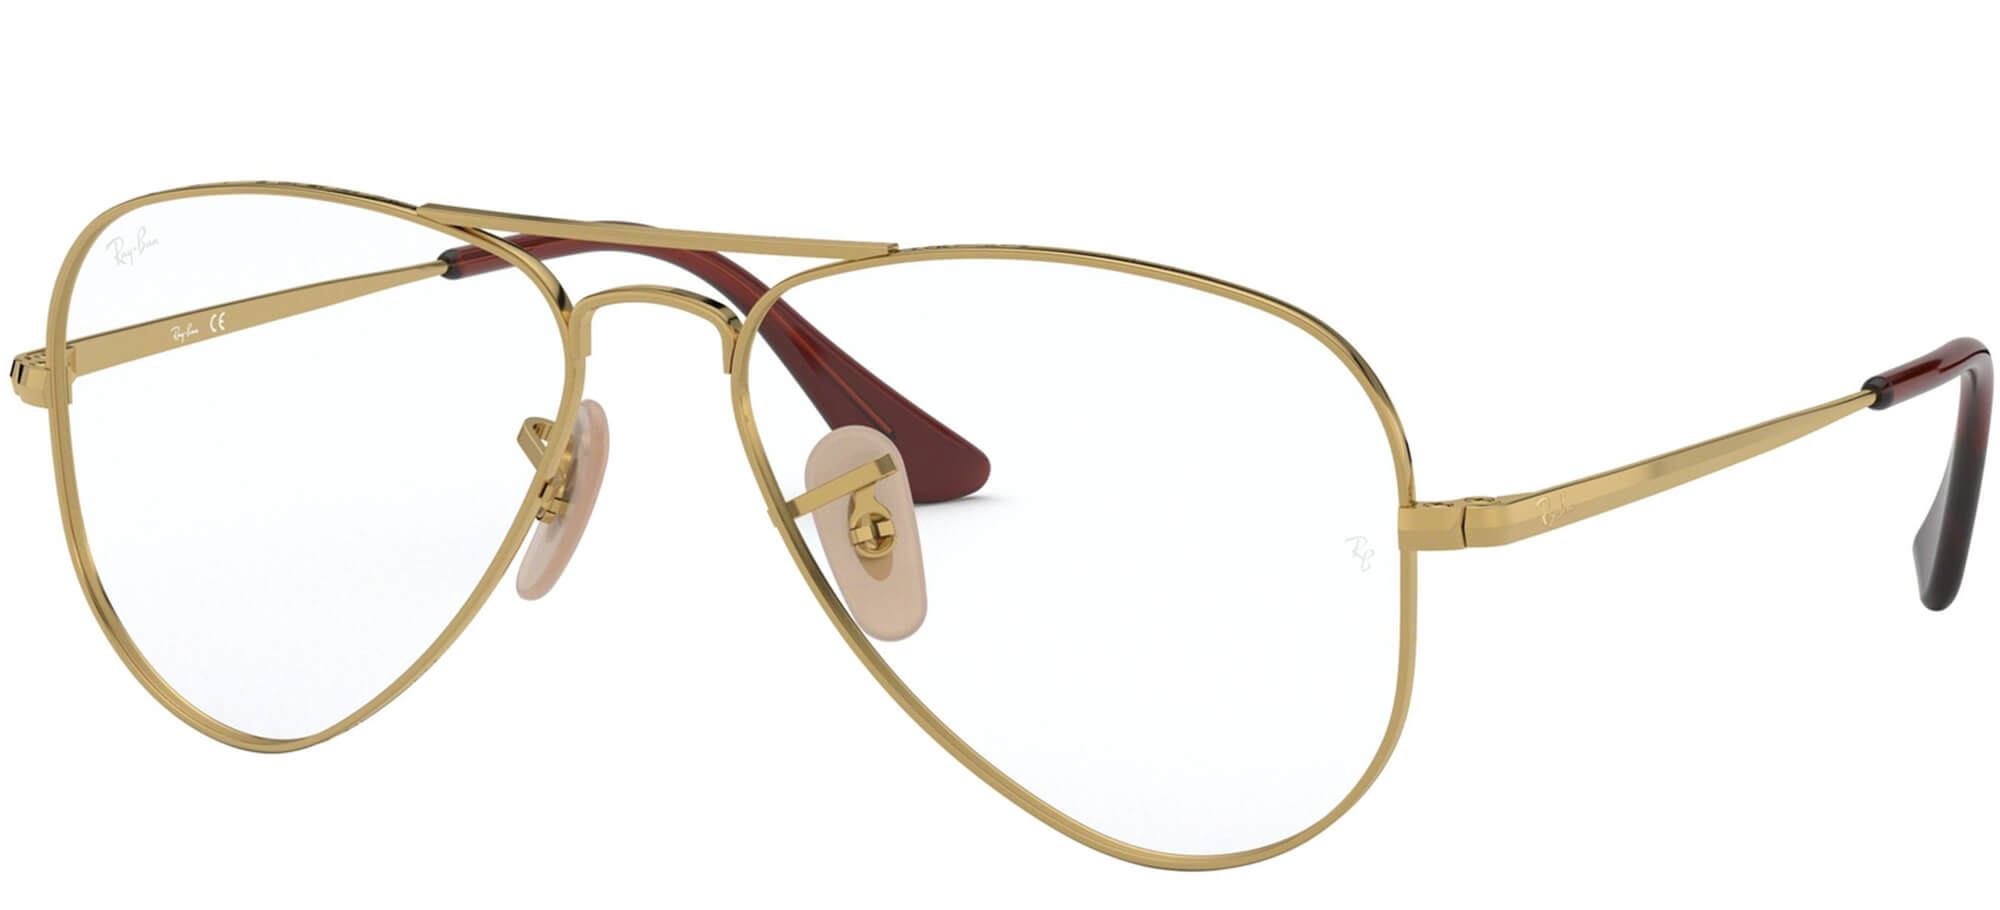 Ray-Ban JuniorRY 1089Gold (4051)